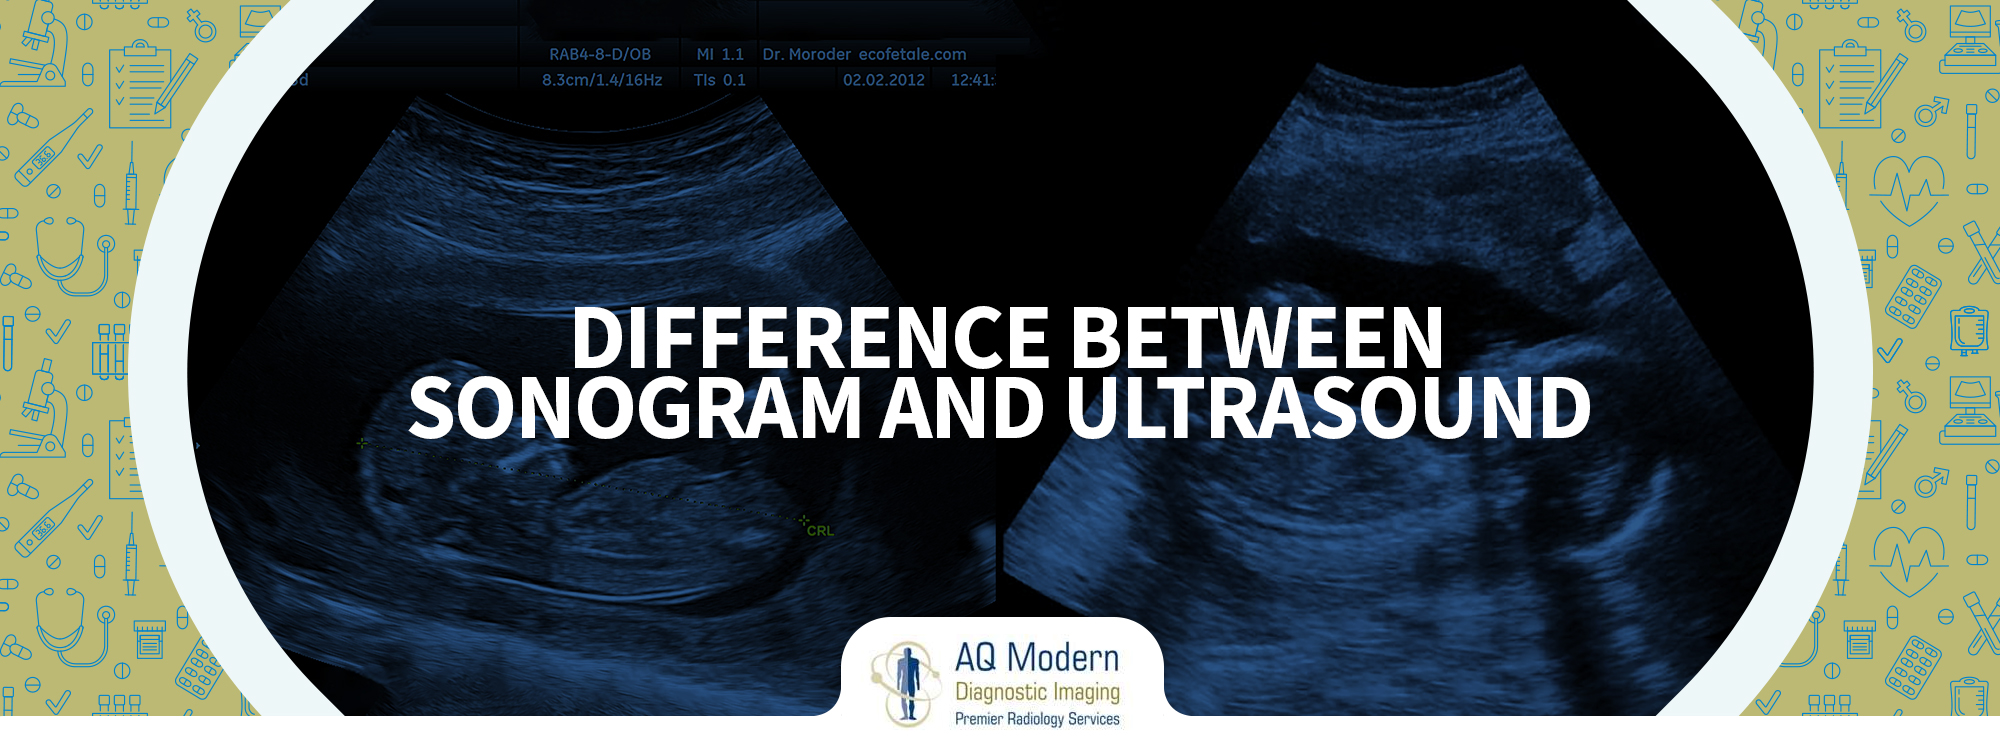 Differences Between Sonogram And Ultrasound